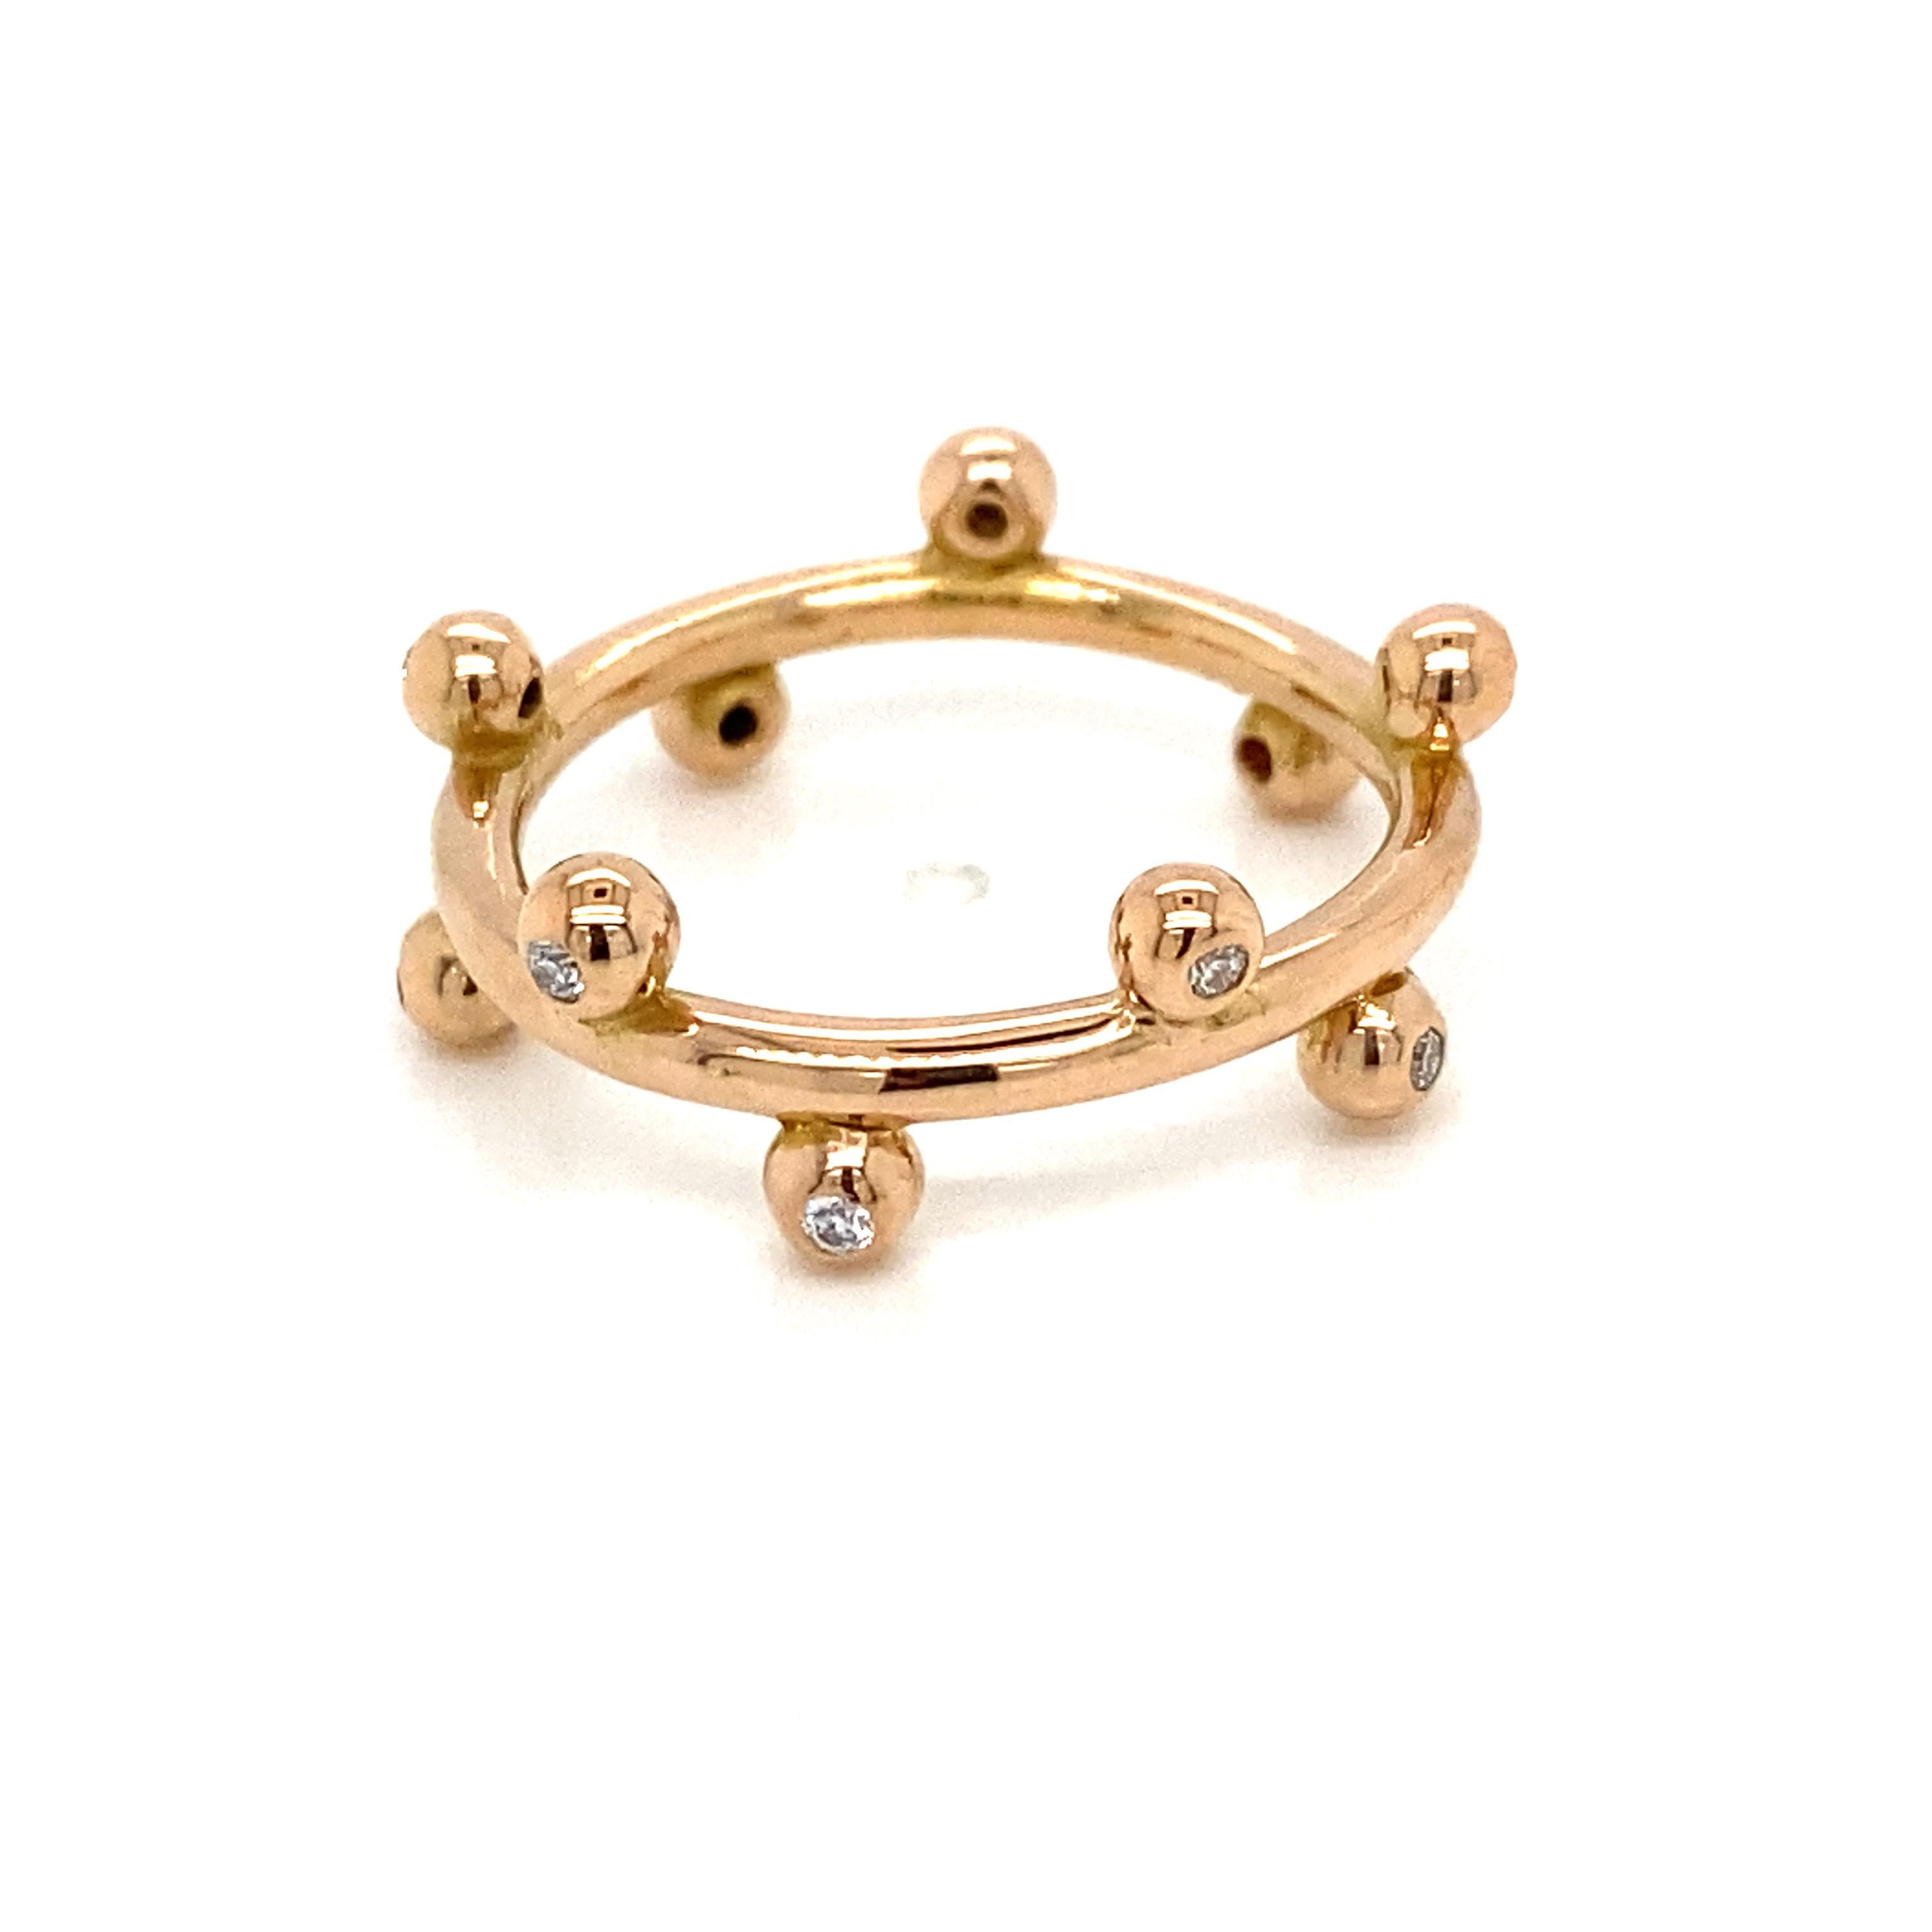 Diamond Bezel Stackable Band Ring in 18K Rose Gold.  Round Brilliant Cut Diamonds weighing 0.15 carat total weight, G-H in color and VS in clarity are expertly set. The Ring measures 1/4 inch in width at the widest point.  Ring size 6 3/4. 4.66